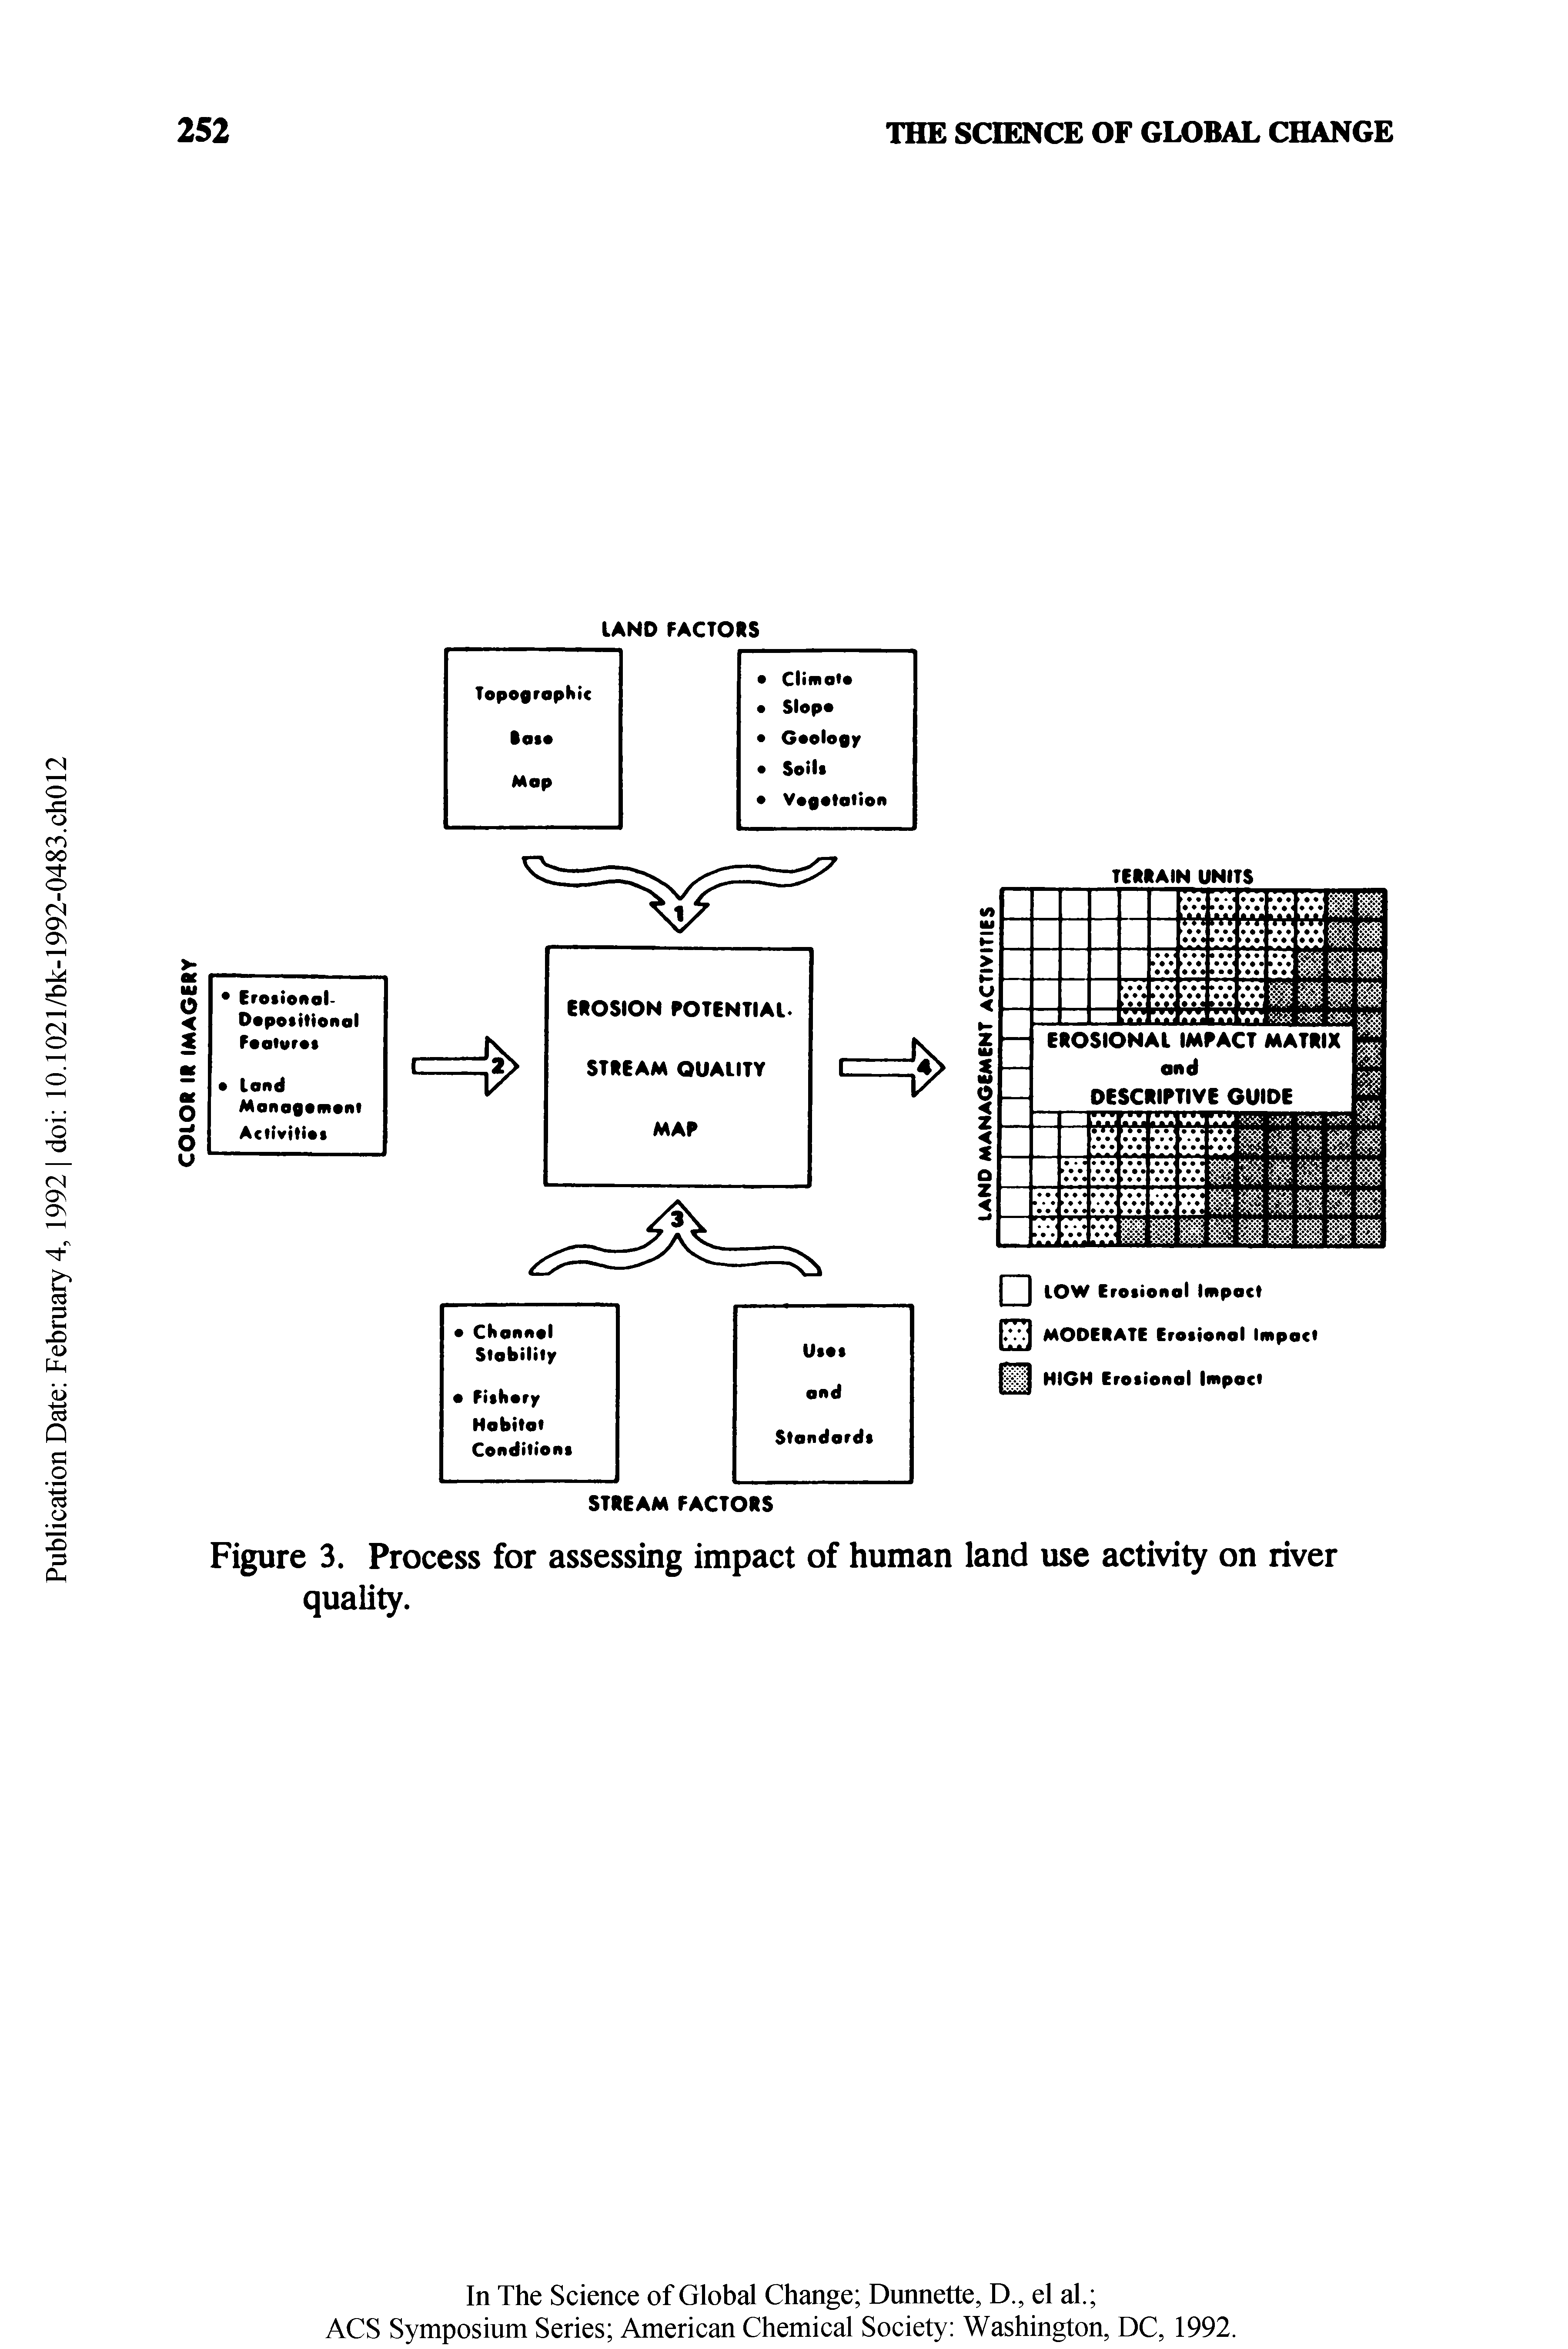 Figure 3. Process for assessing impact of human land use activity on river quality.